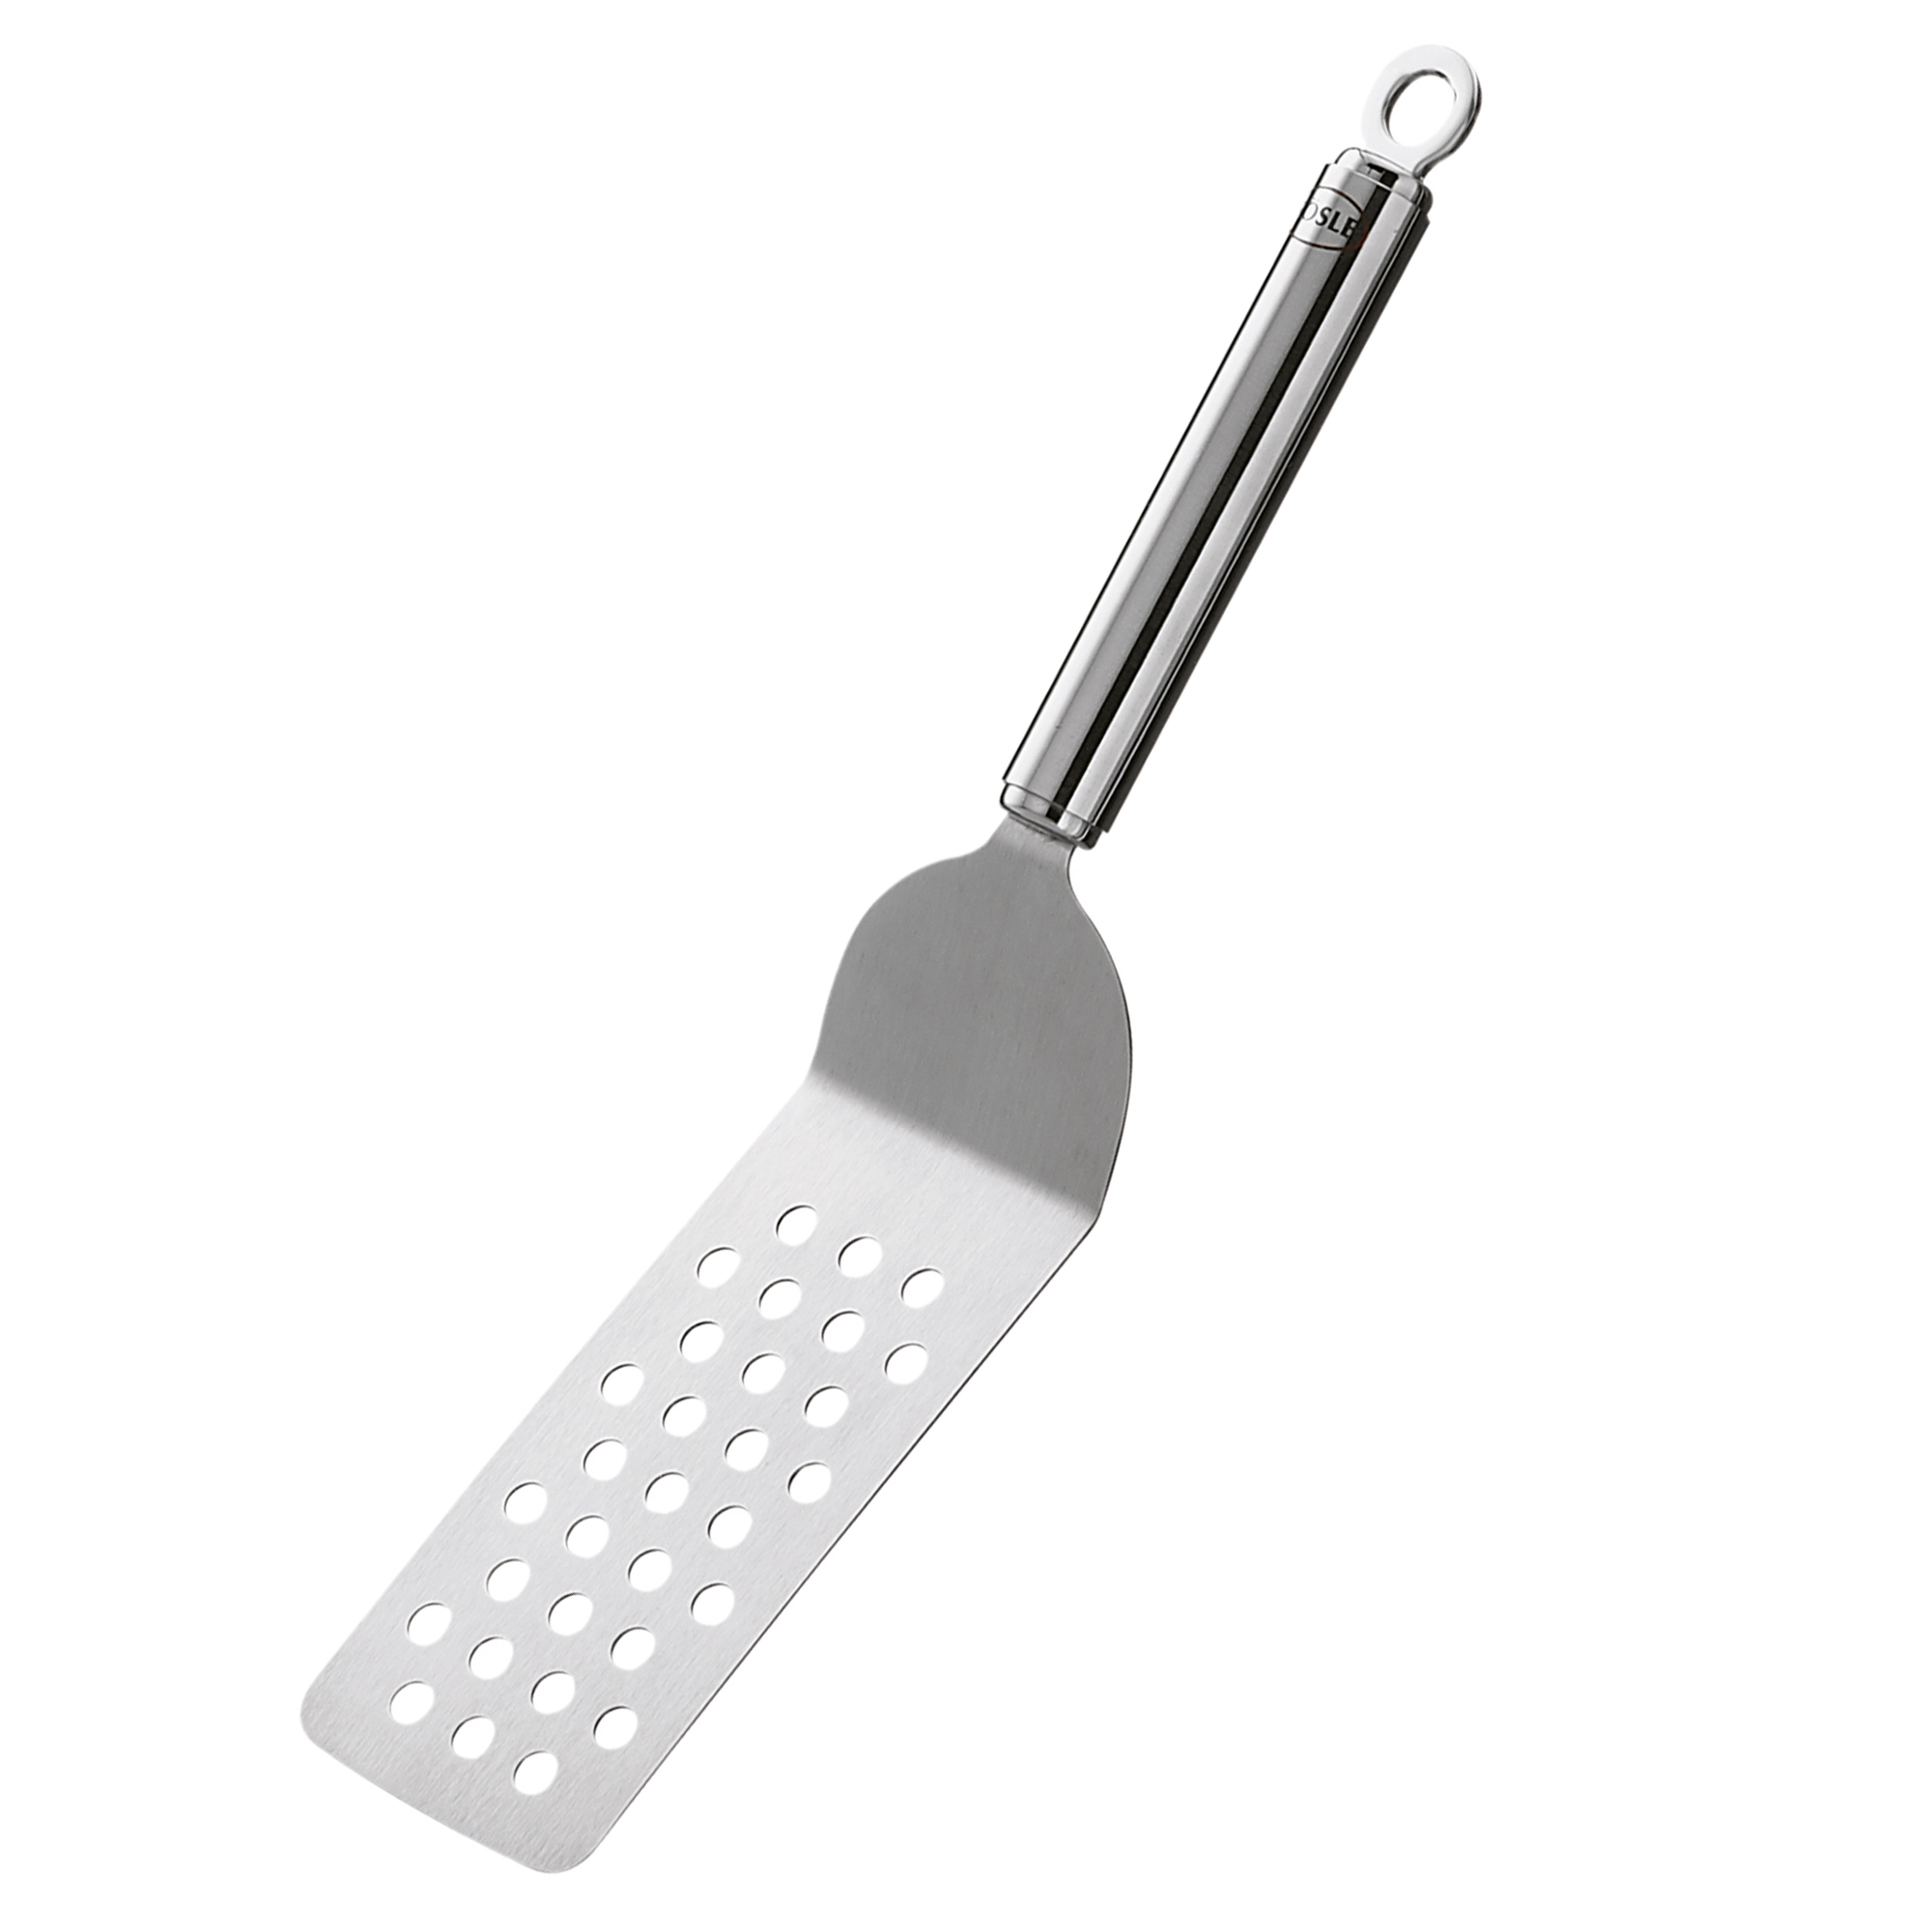 Angled Spatula perforated 32 cm|12.6 in.